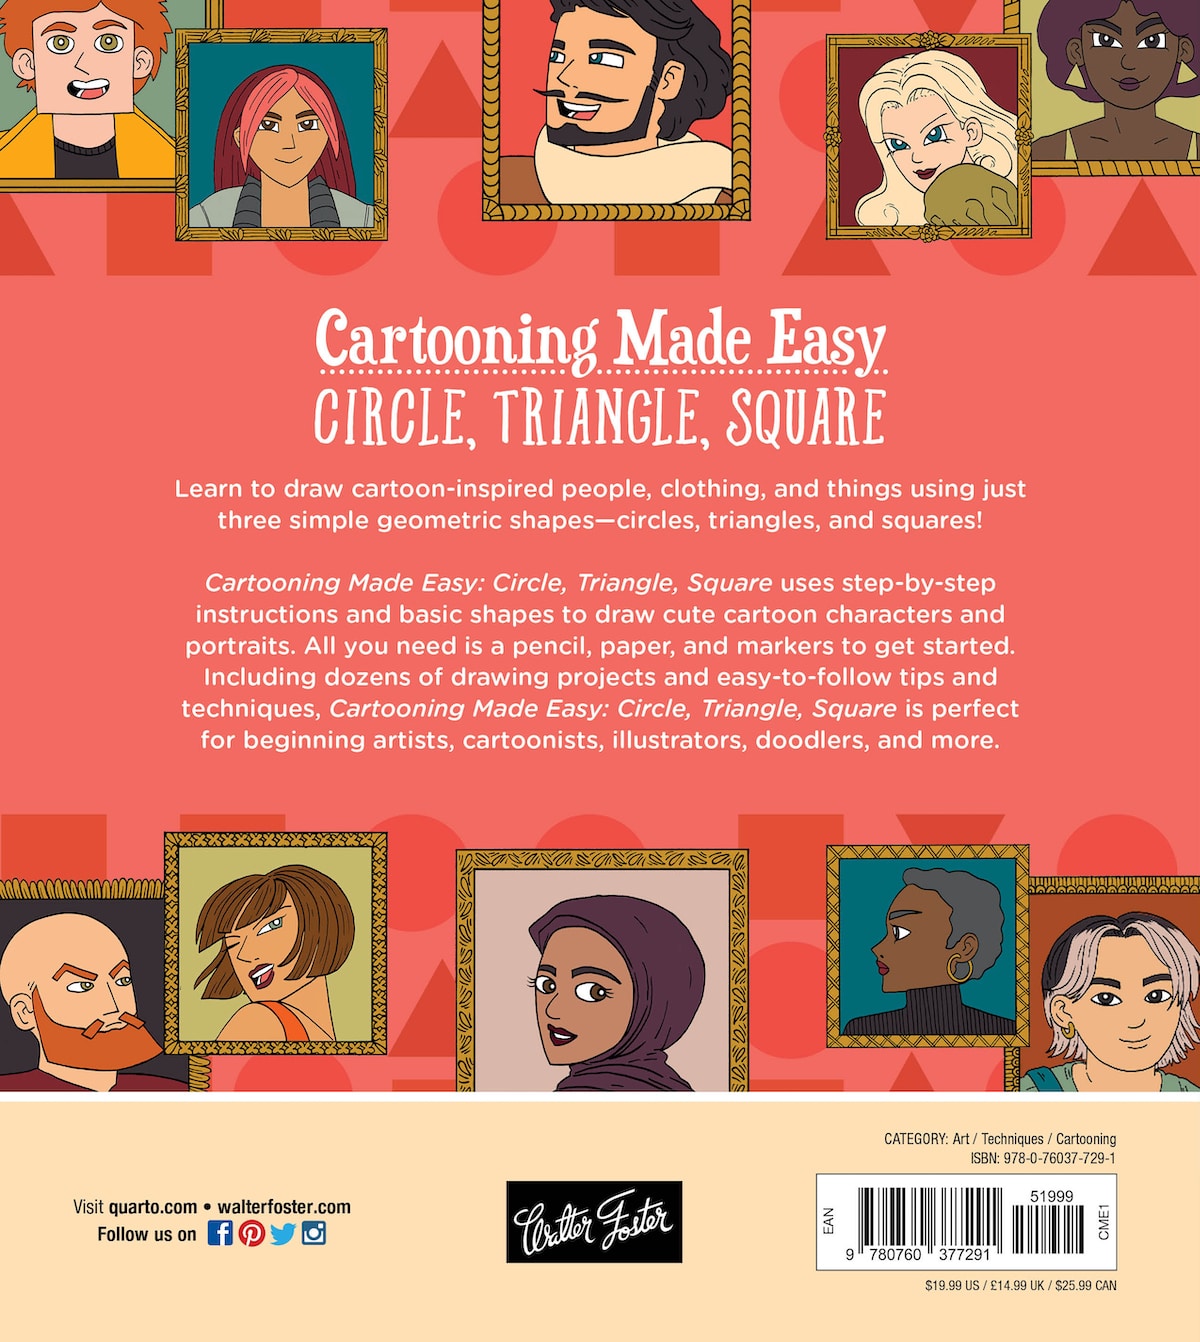 Cartooning Made Easy Book by Margherita Cole